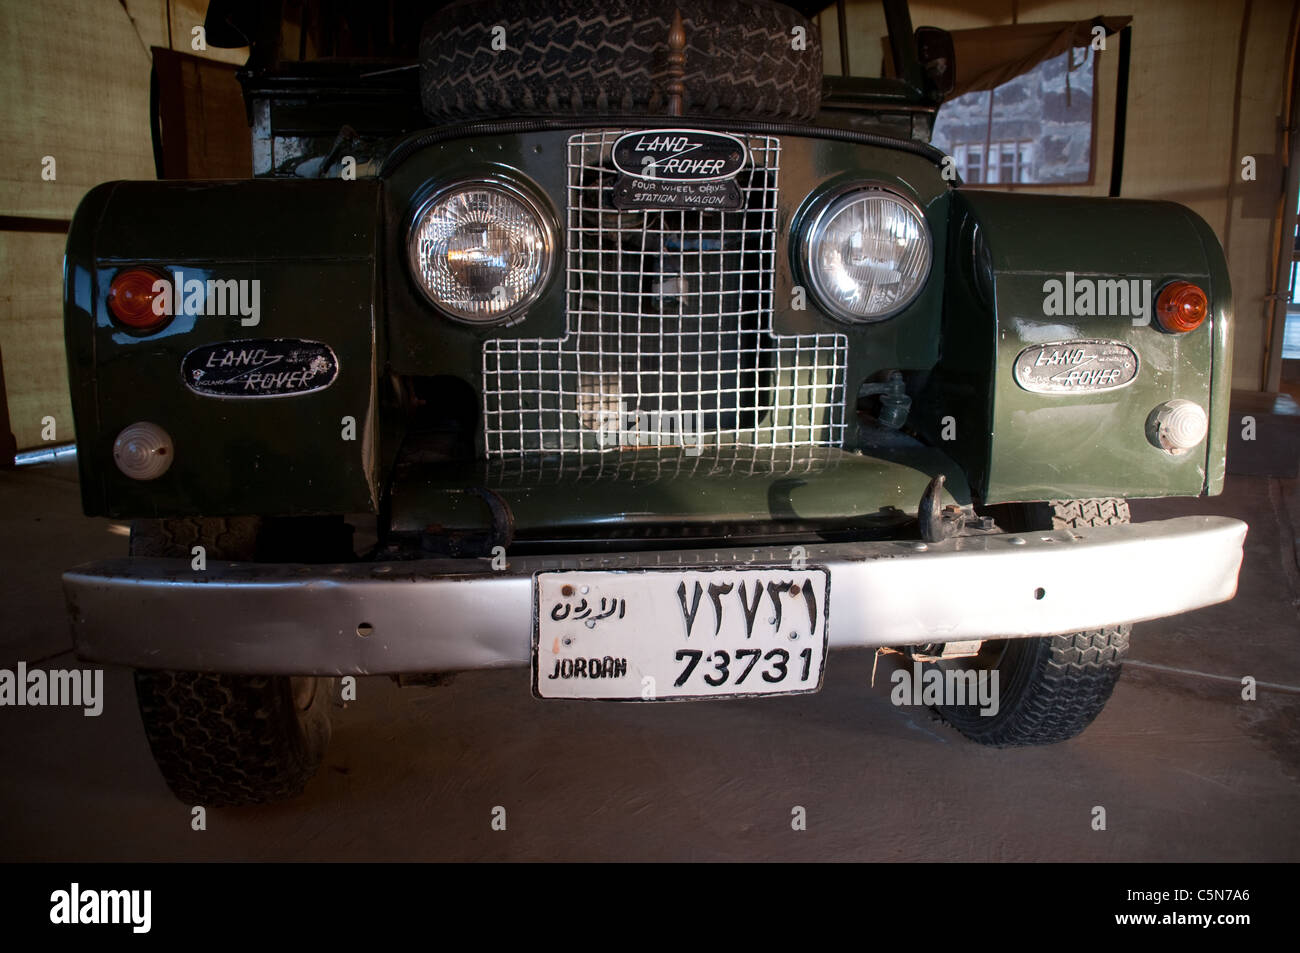 An old 1956 green vintage military Land Rover on display at the Azraq Lodge, in the oasis town of Azraq in the Badia region, Eastern Desert of Jordan. Stock Photo